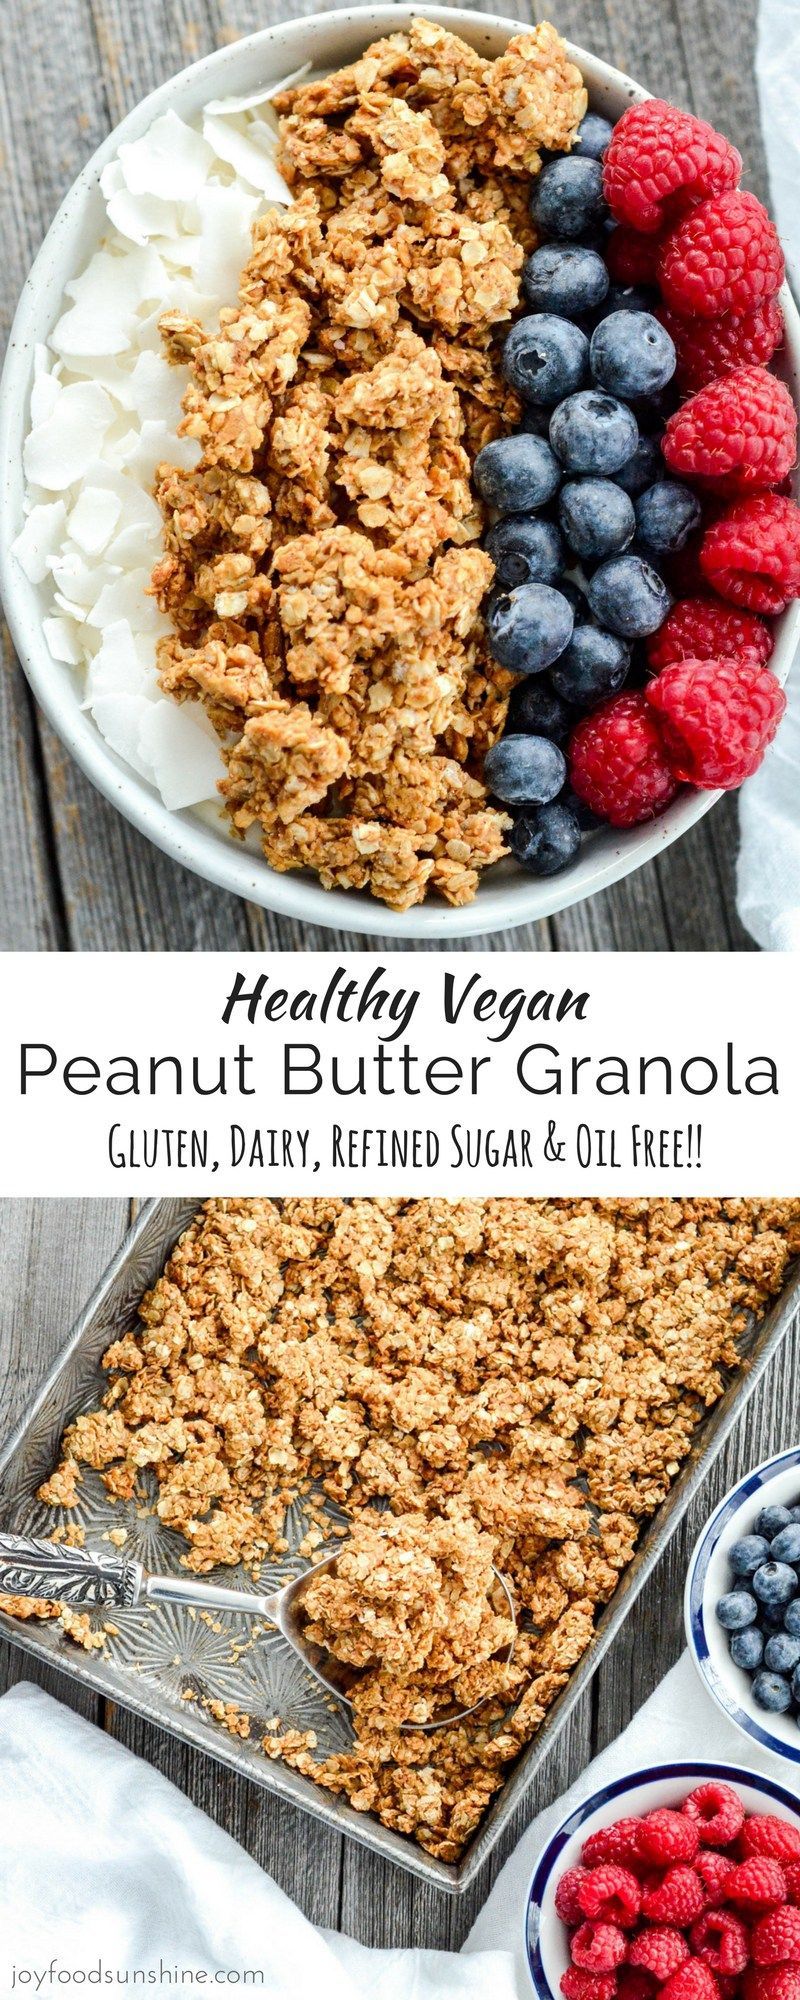 This Healthy Peanut Butter Granola is the perfect make-ahead breakfast recipe! With only 6 ingredients its so easy to make!